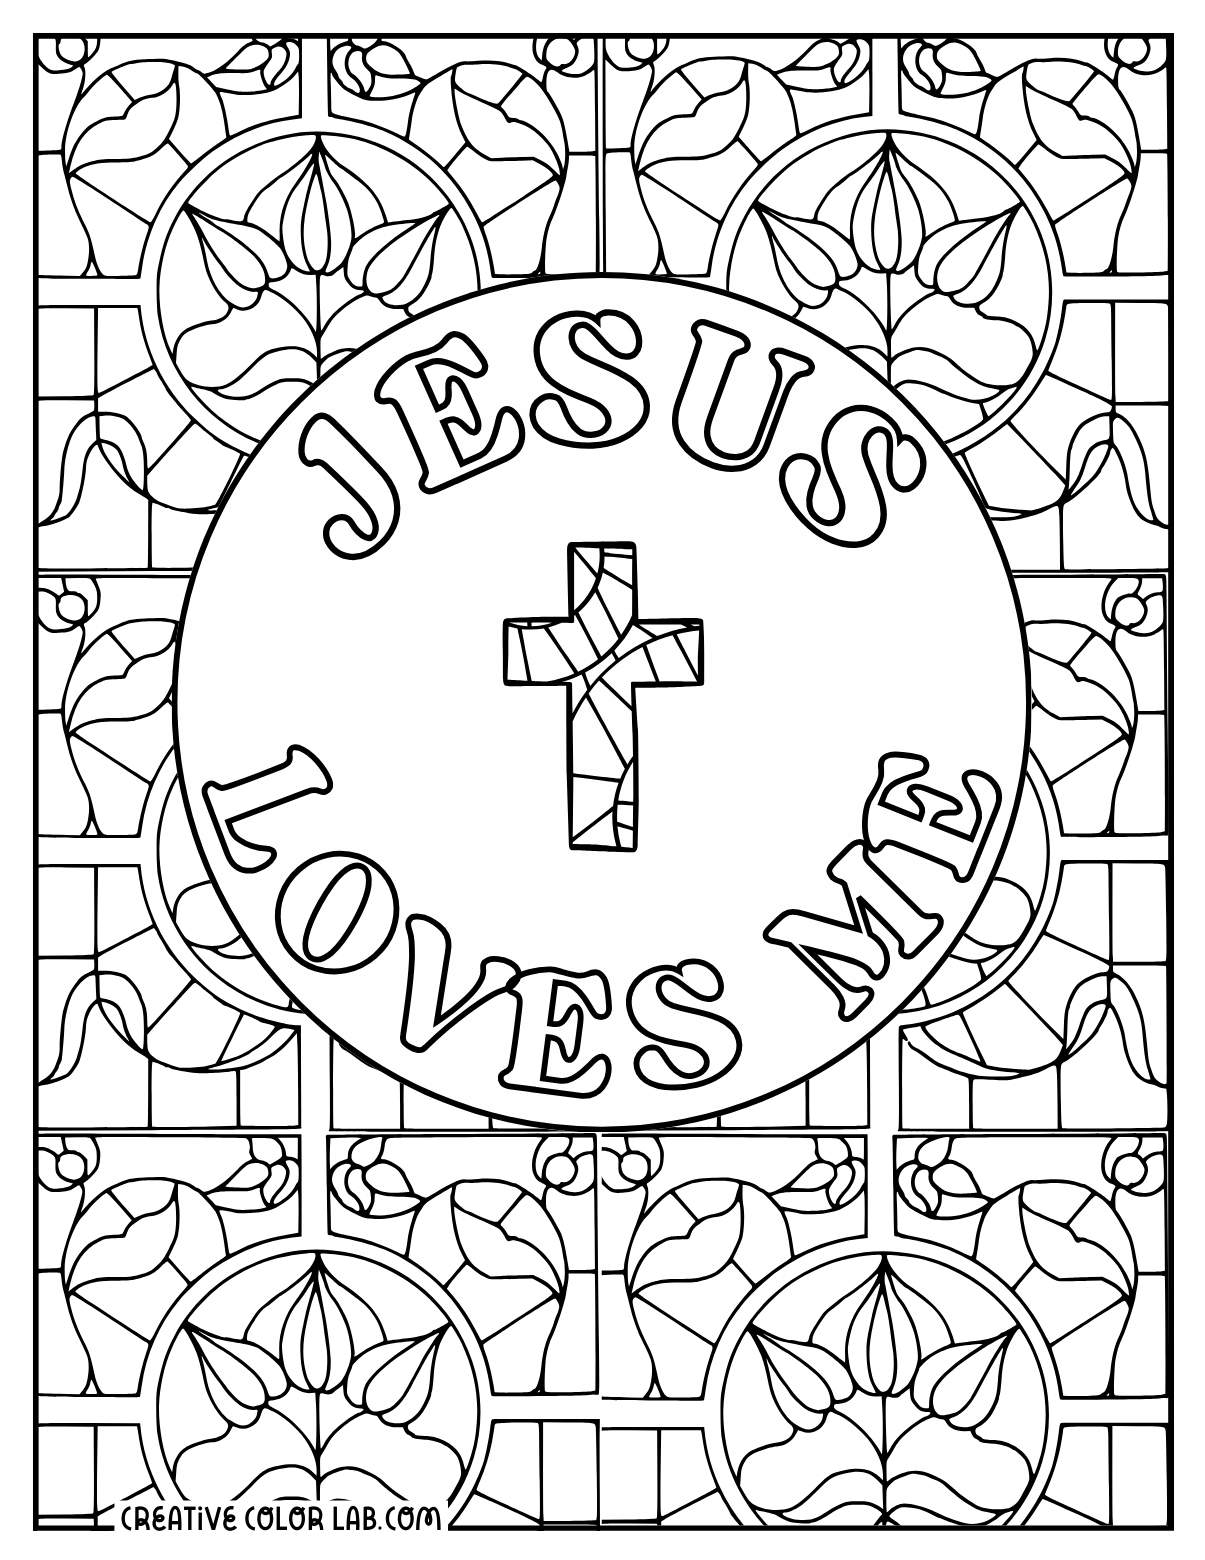 Detailed Jesus loves me stained glass coloring page for adults.